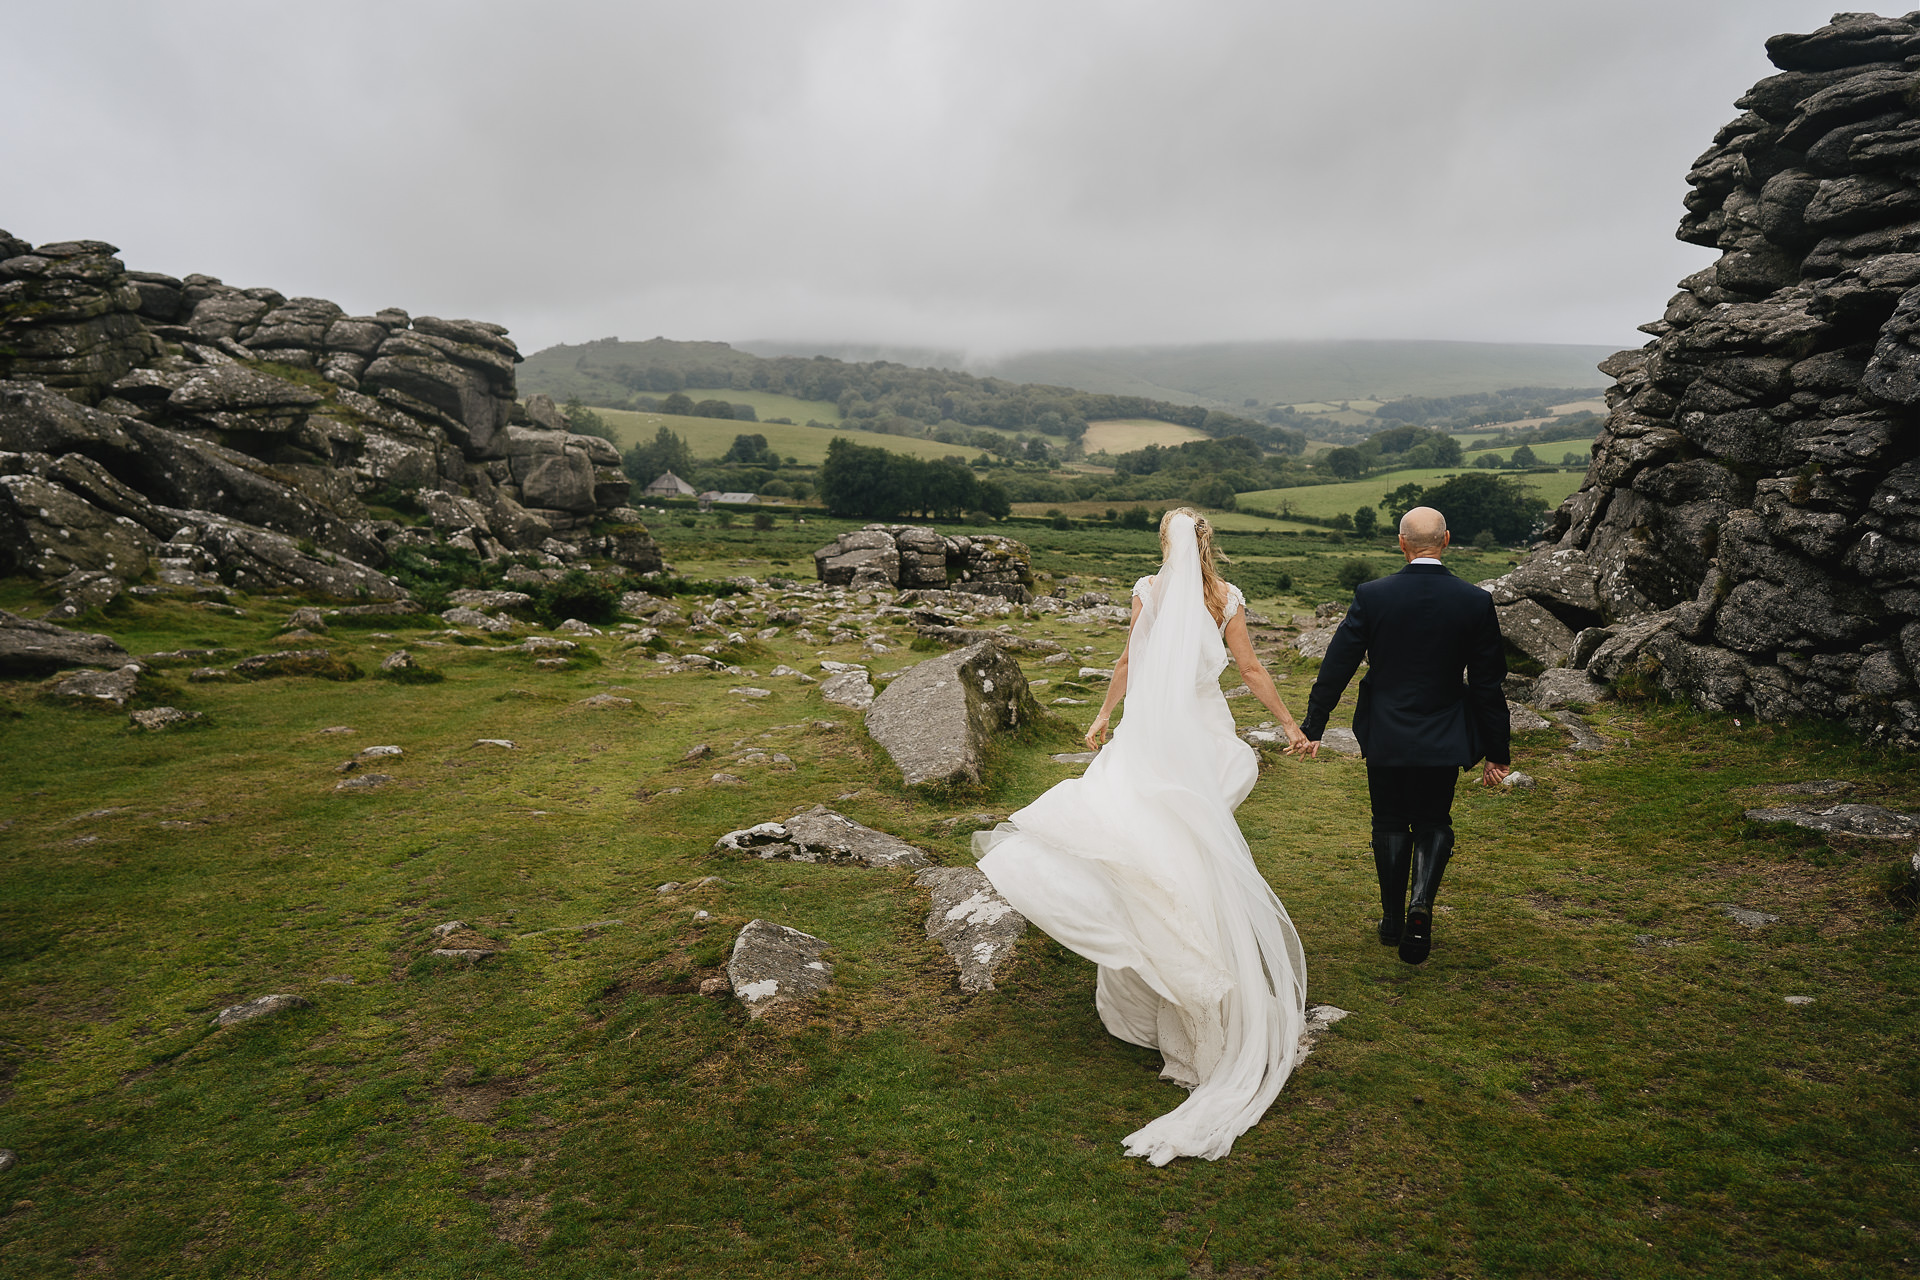 Bride and groom walking hand in hand across Dartmoor with views across the hills and rocks